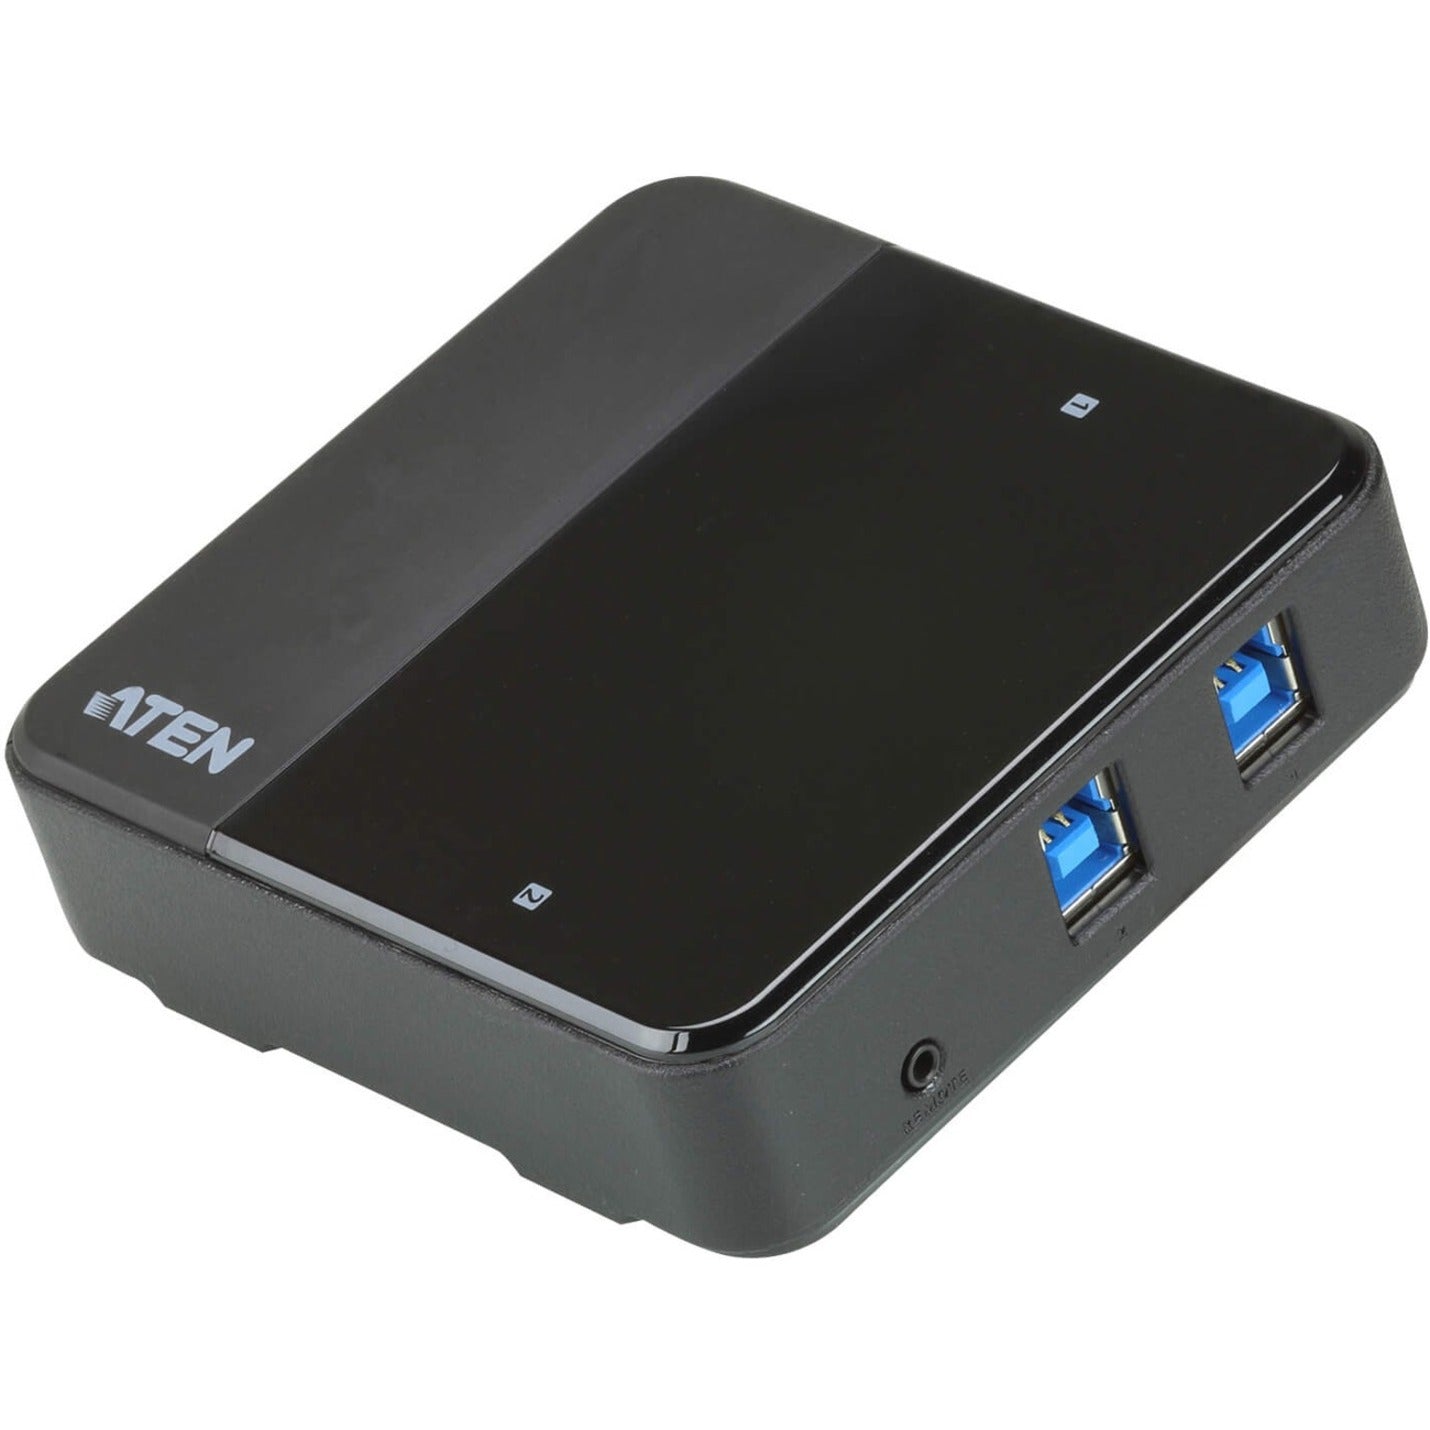 ATEN US3324 2 x 4 USB 3.2 Gen1 Peripheral Sharing Switch, 4 USB Ports, Easy PC/Mac/Linux Connectivity